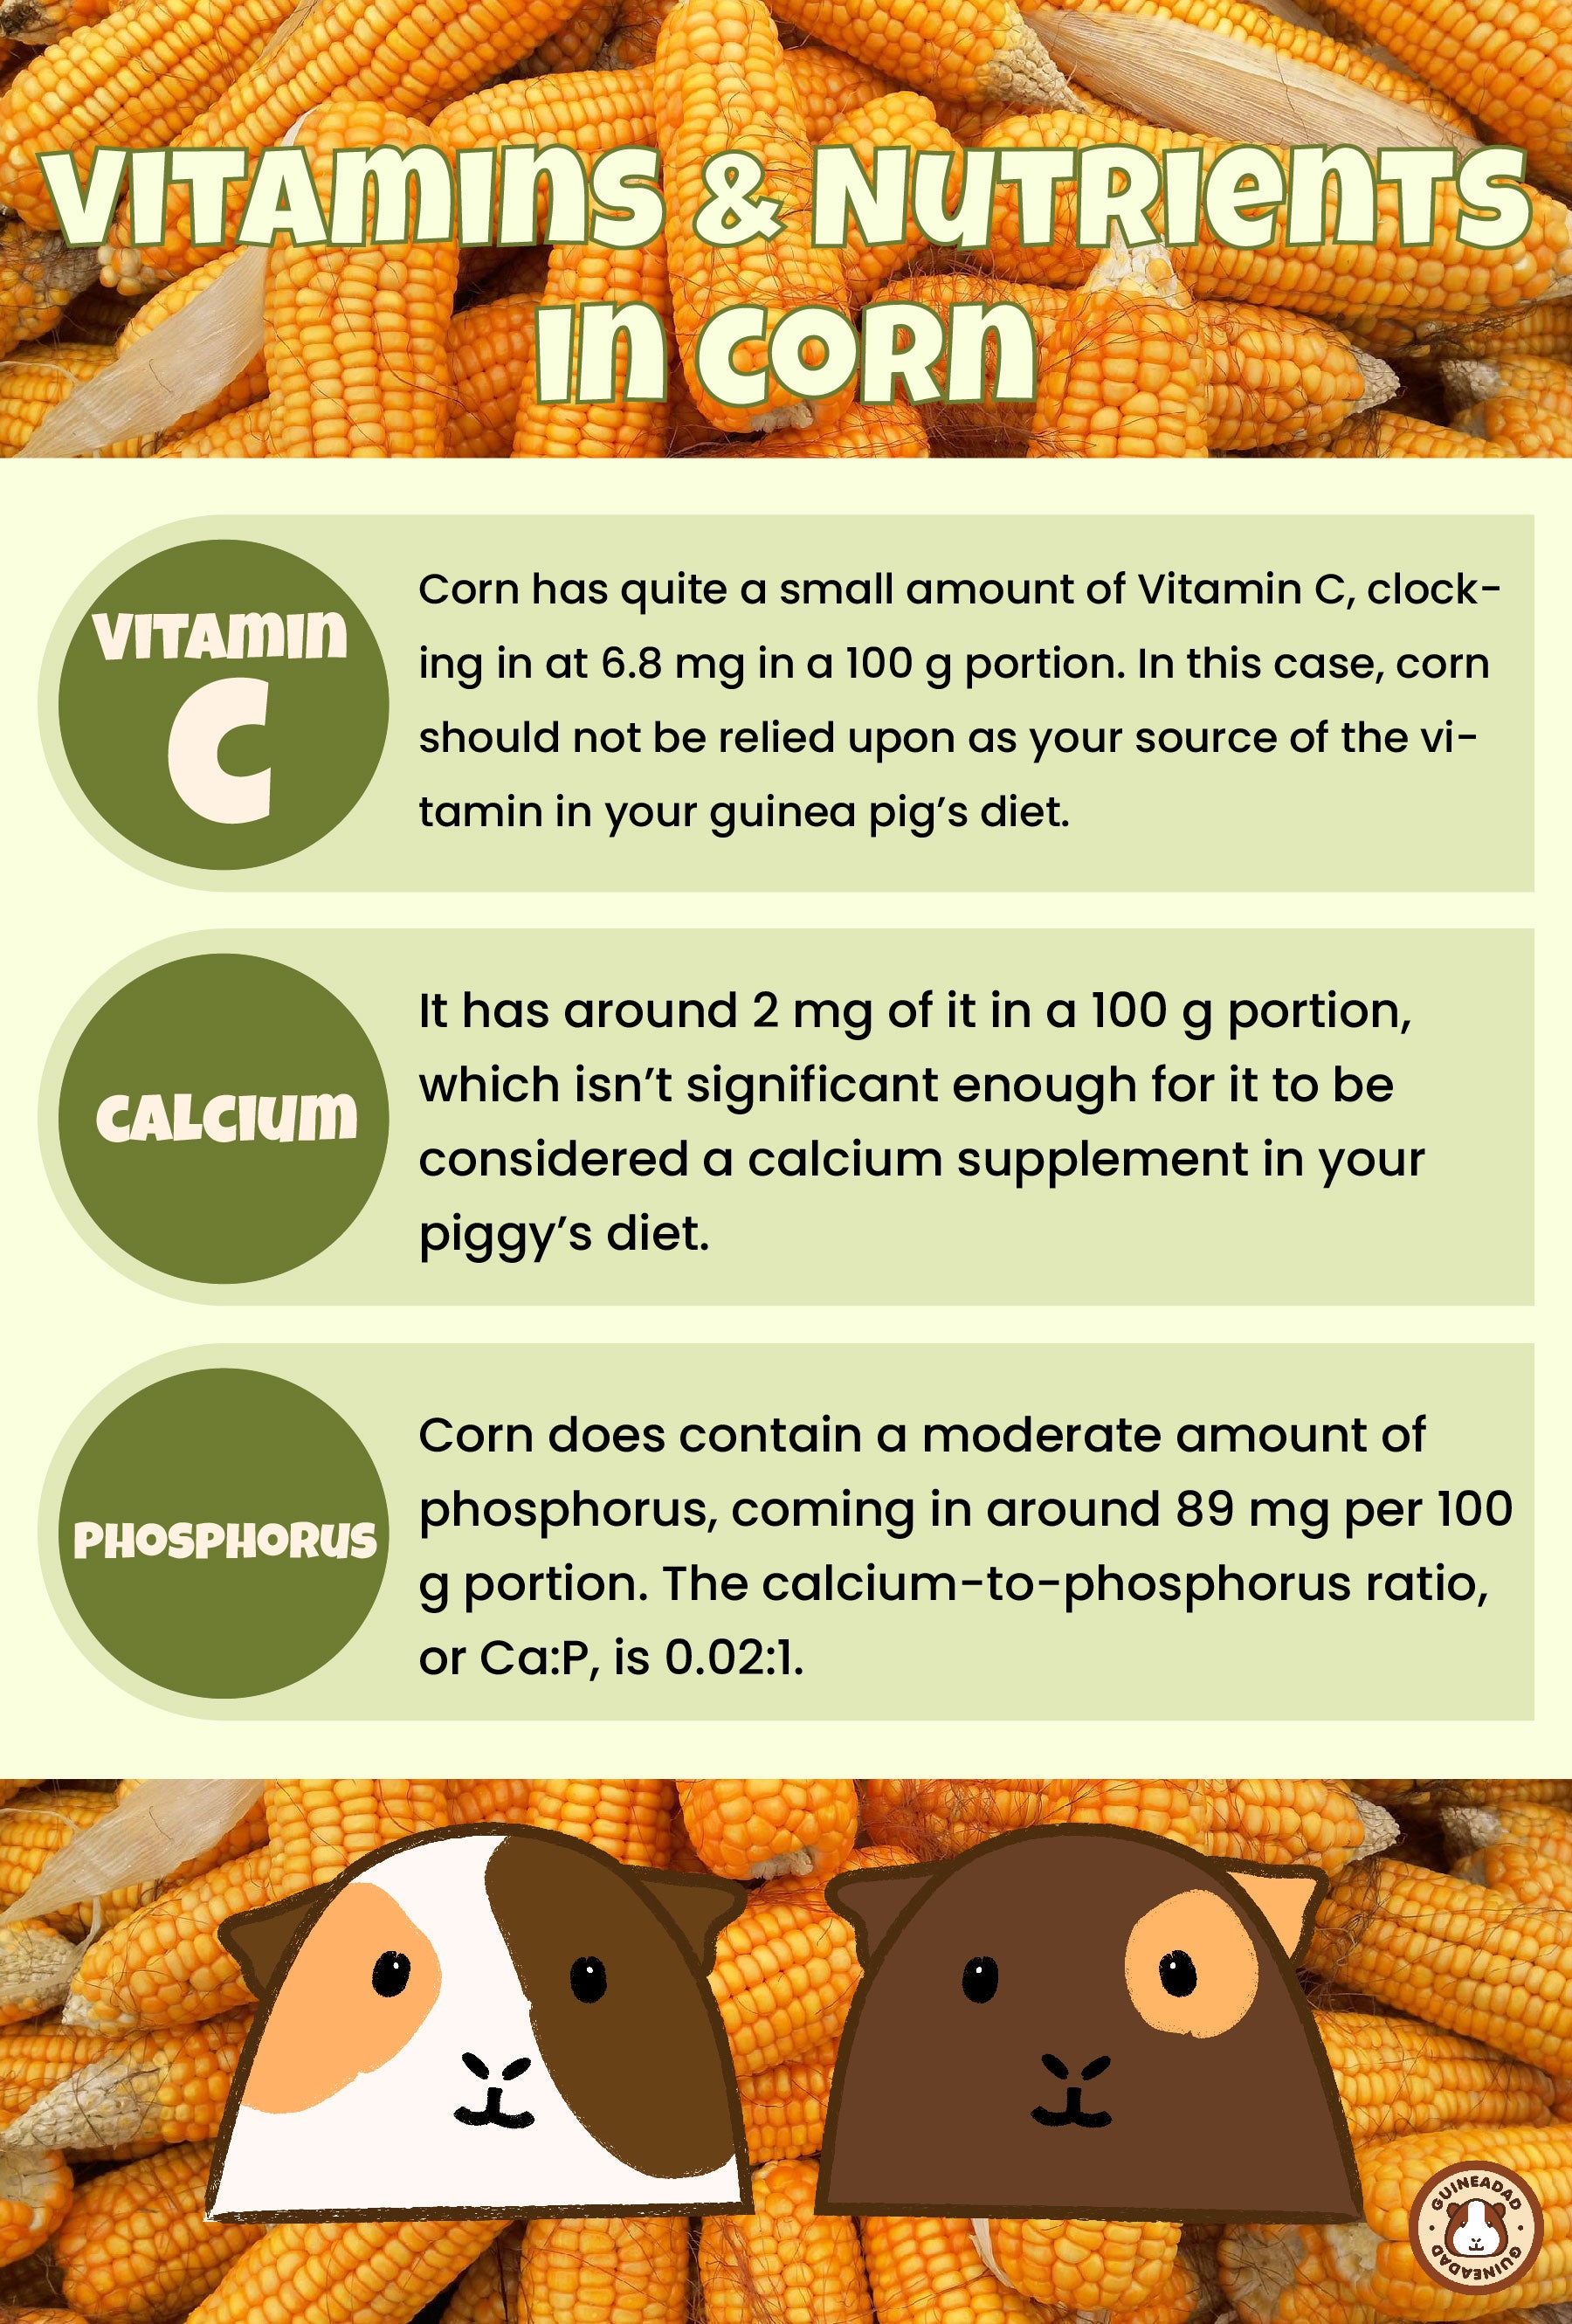 Infographic displaying the vitamins and nutrients in corn for guinea pigs